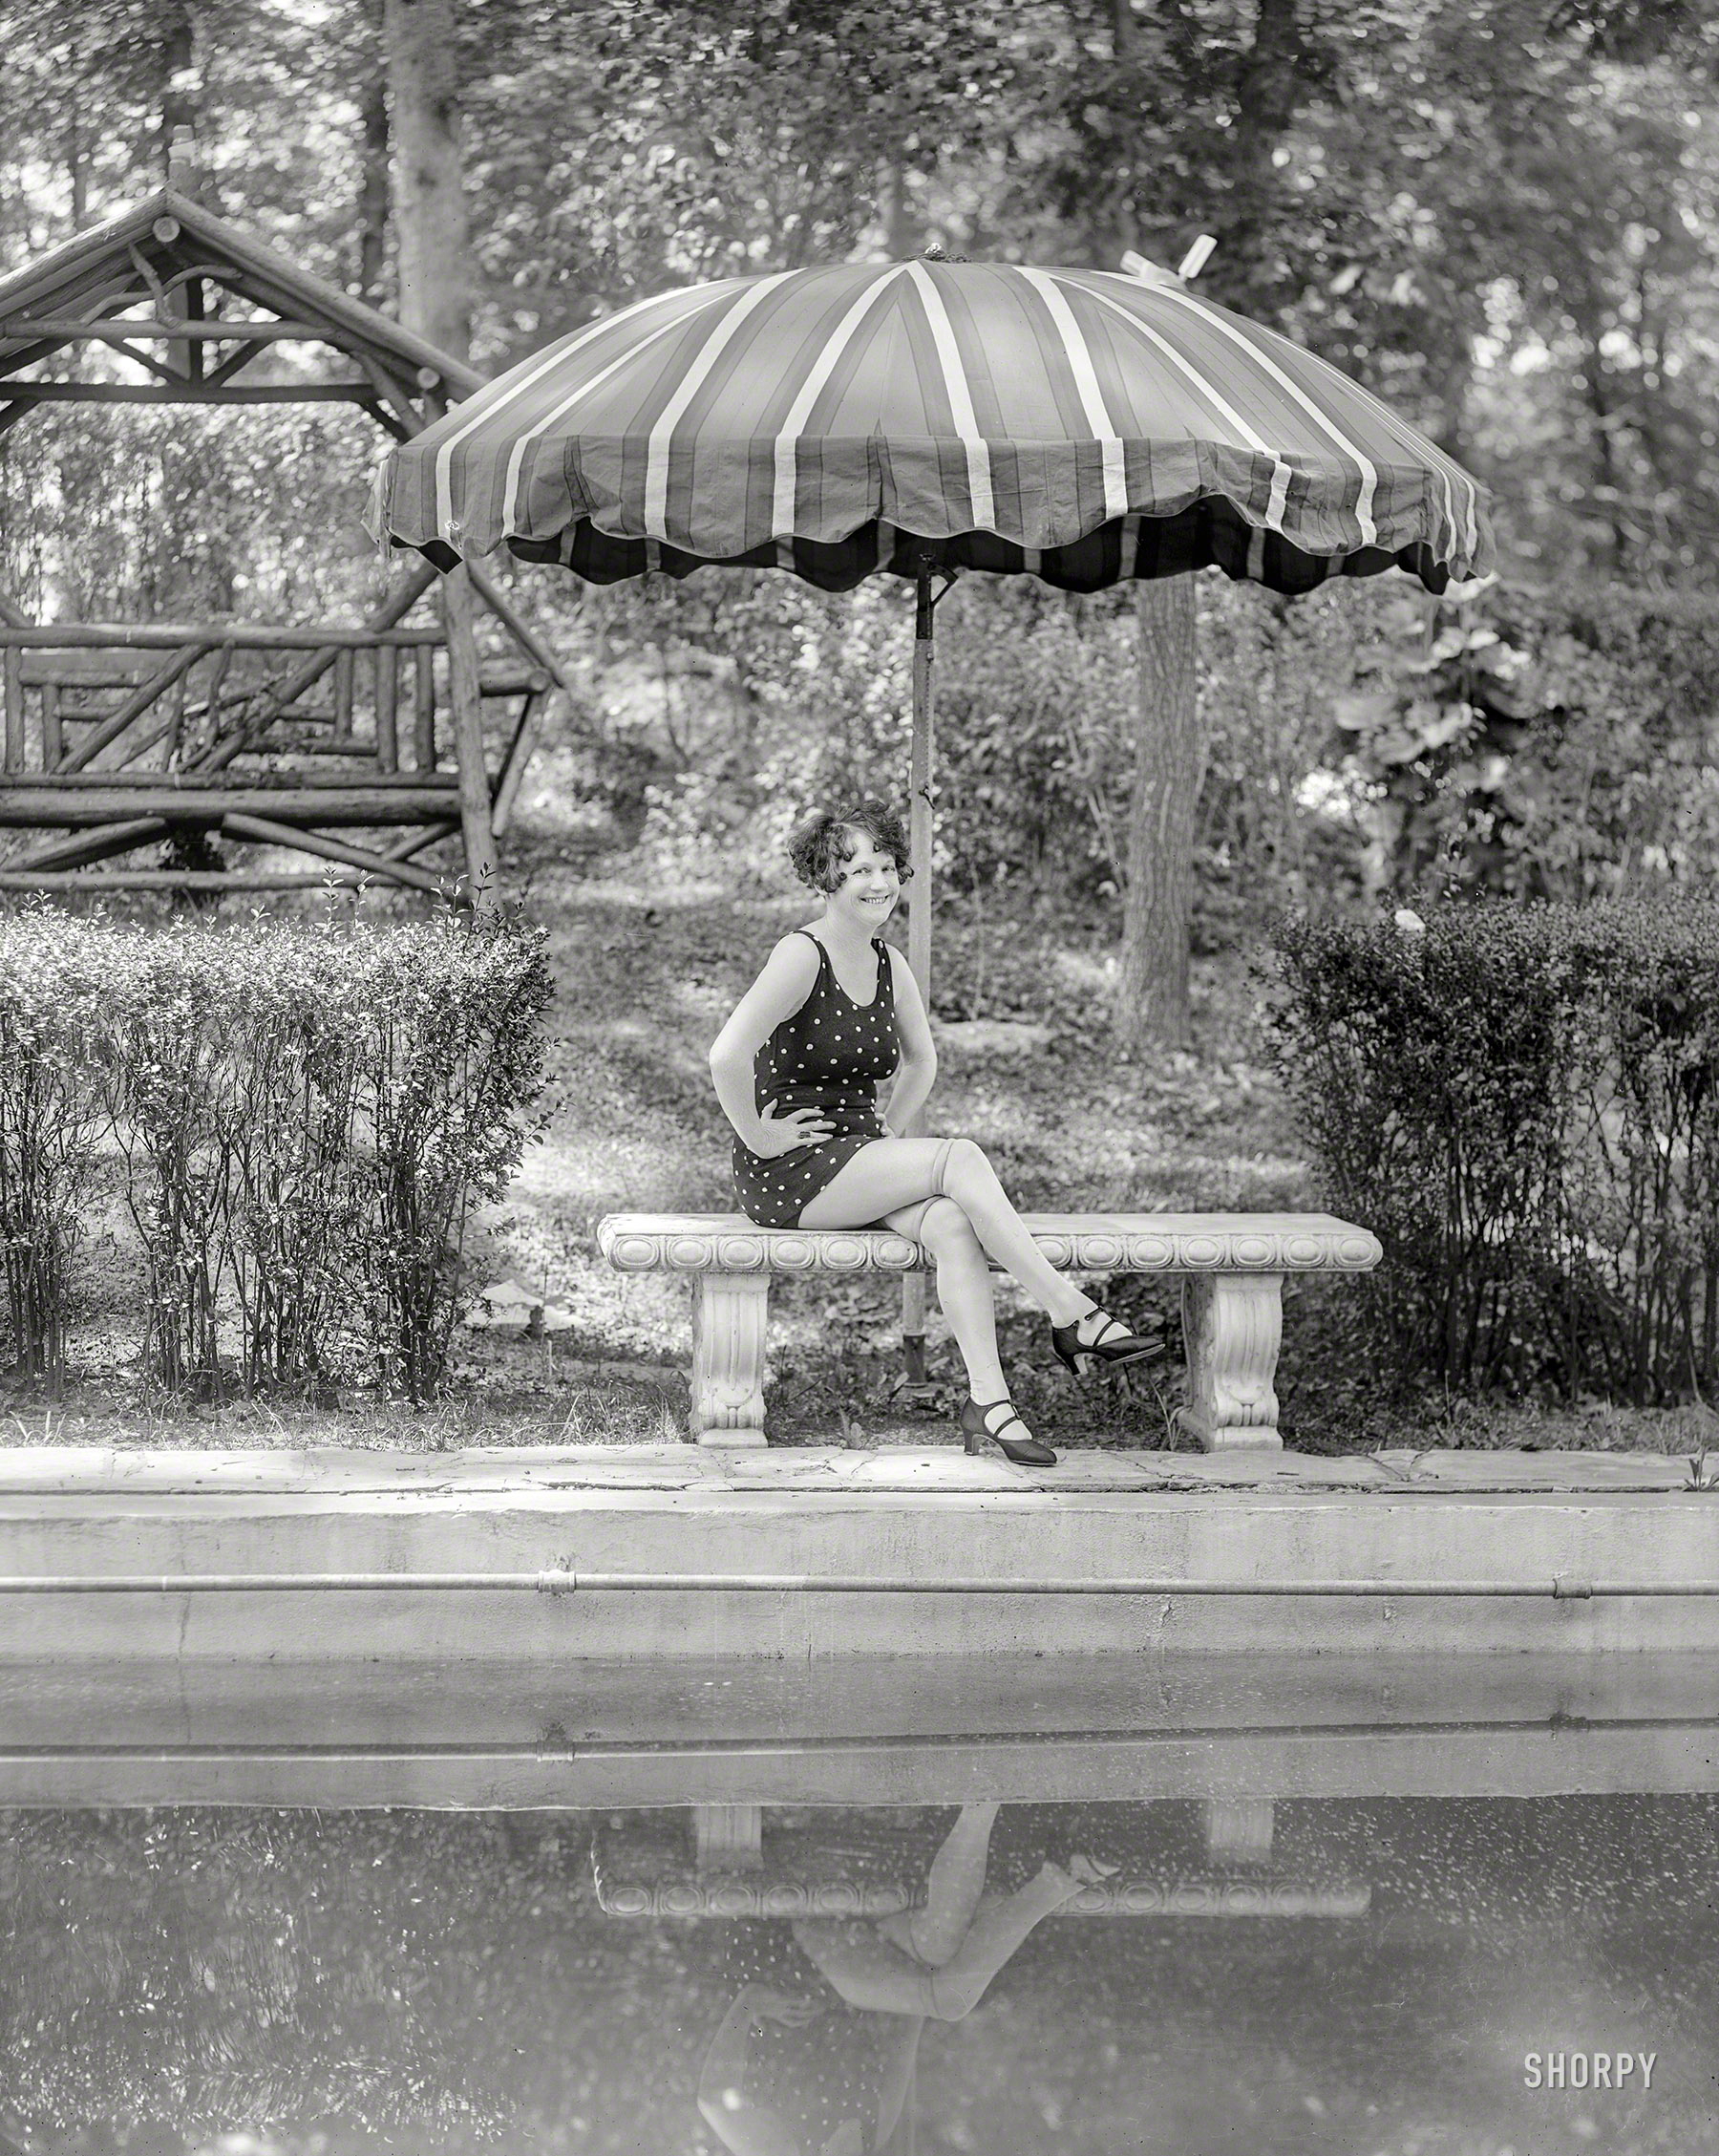 Washington, D.C., circa 1930. "Gibbs, Mrs. Malcolm." Maude Foote Gibbs, fiftyish wife of the People's Drug Store founder, modeling a very distant ancestor of the polka-dot bikini.  Harris & Ewing Collection glass negative. View full size.